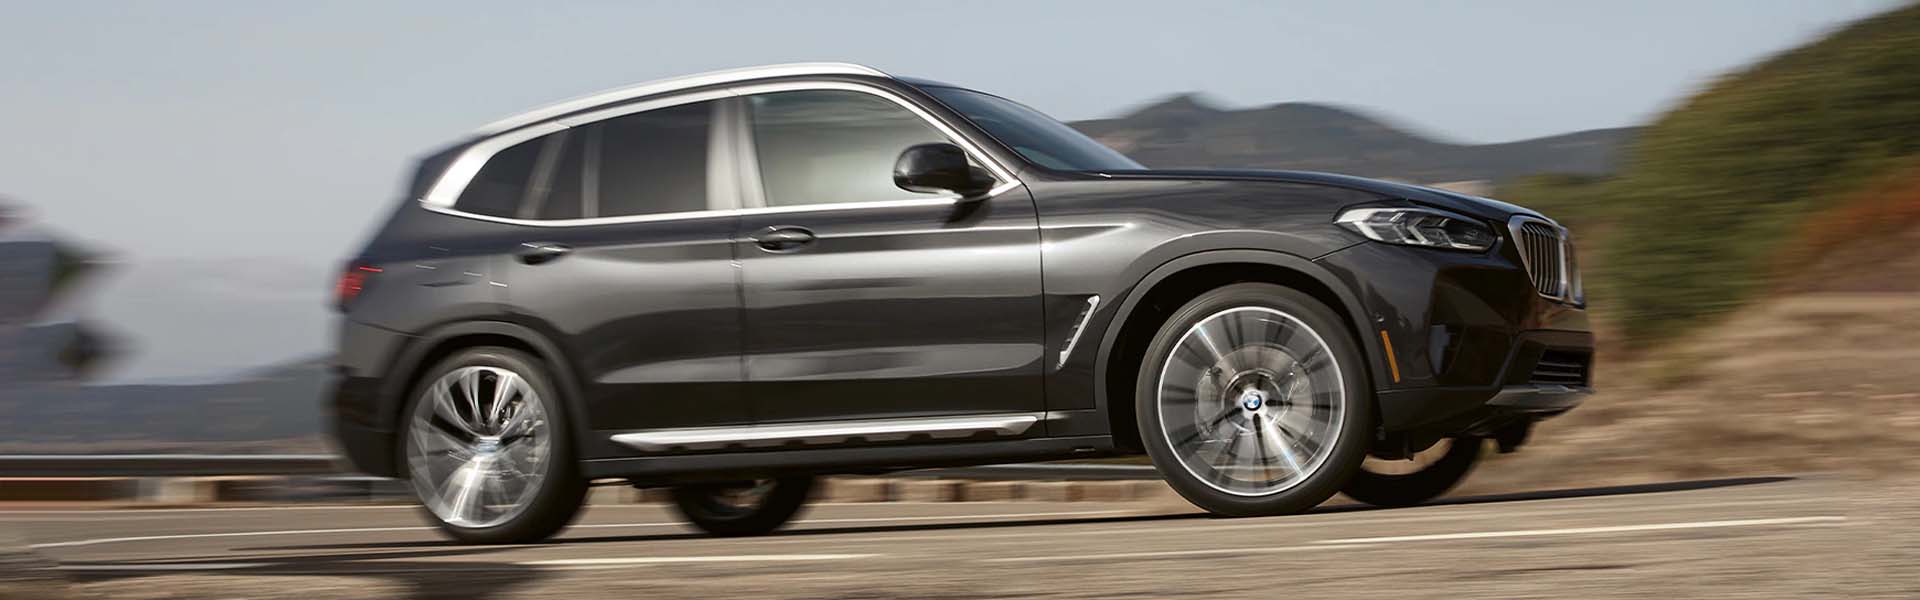 Buyer's Guide to the 2023 BMW X7